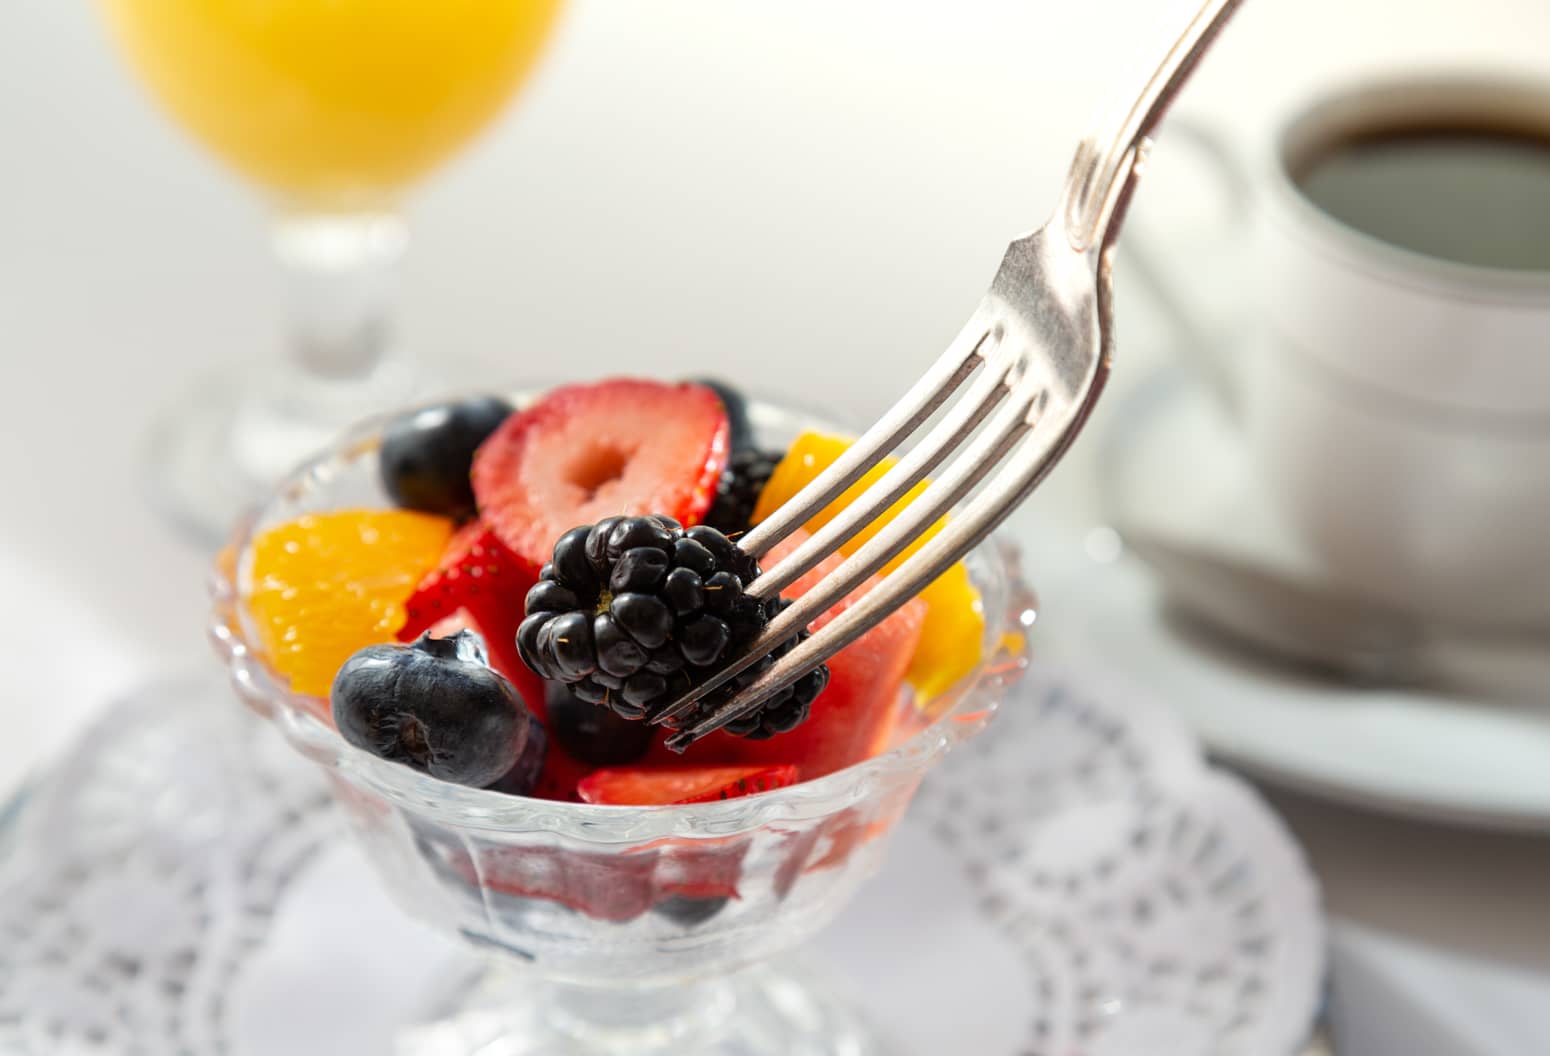 Fresh fruit in a glass dish served with coffee and orange juice